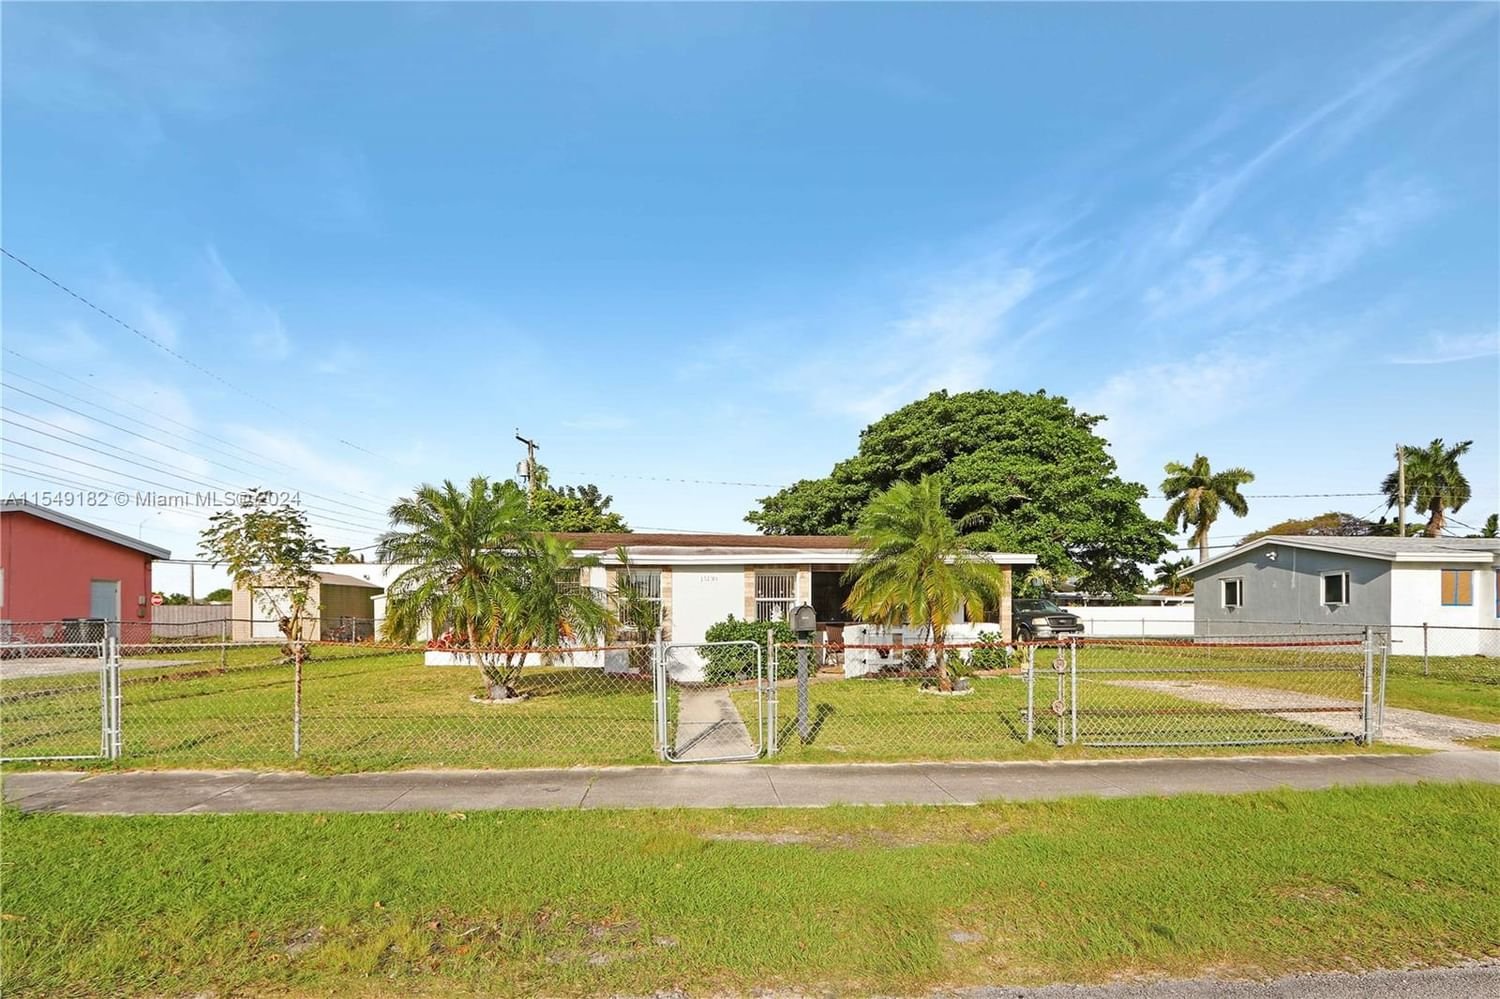 Real estate property located at 15130 Fillmore St, Miami-Dade County, REPLAT OF PORTIONS OF RIC, Miami, FL